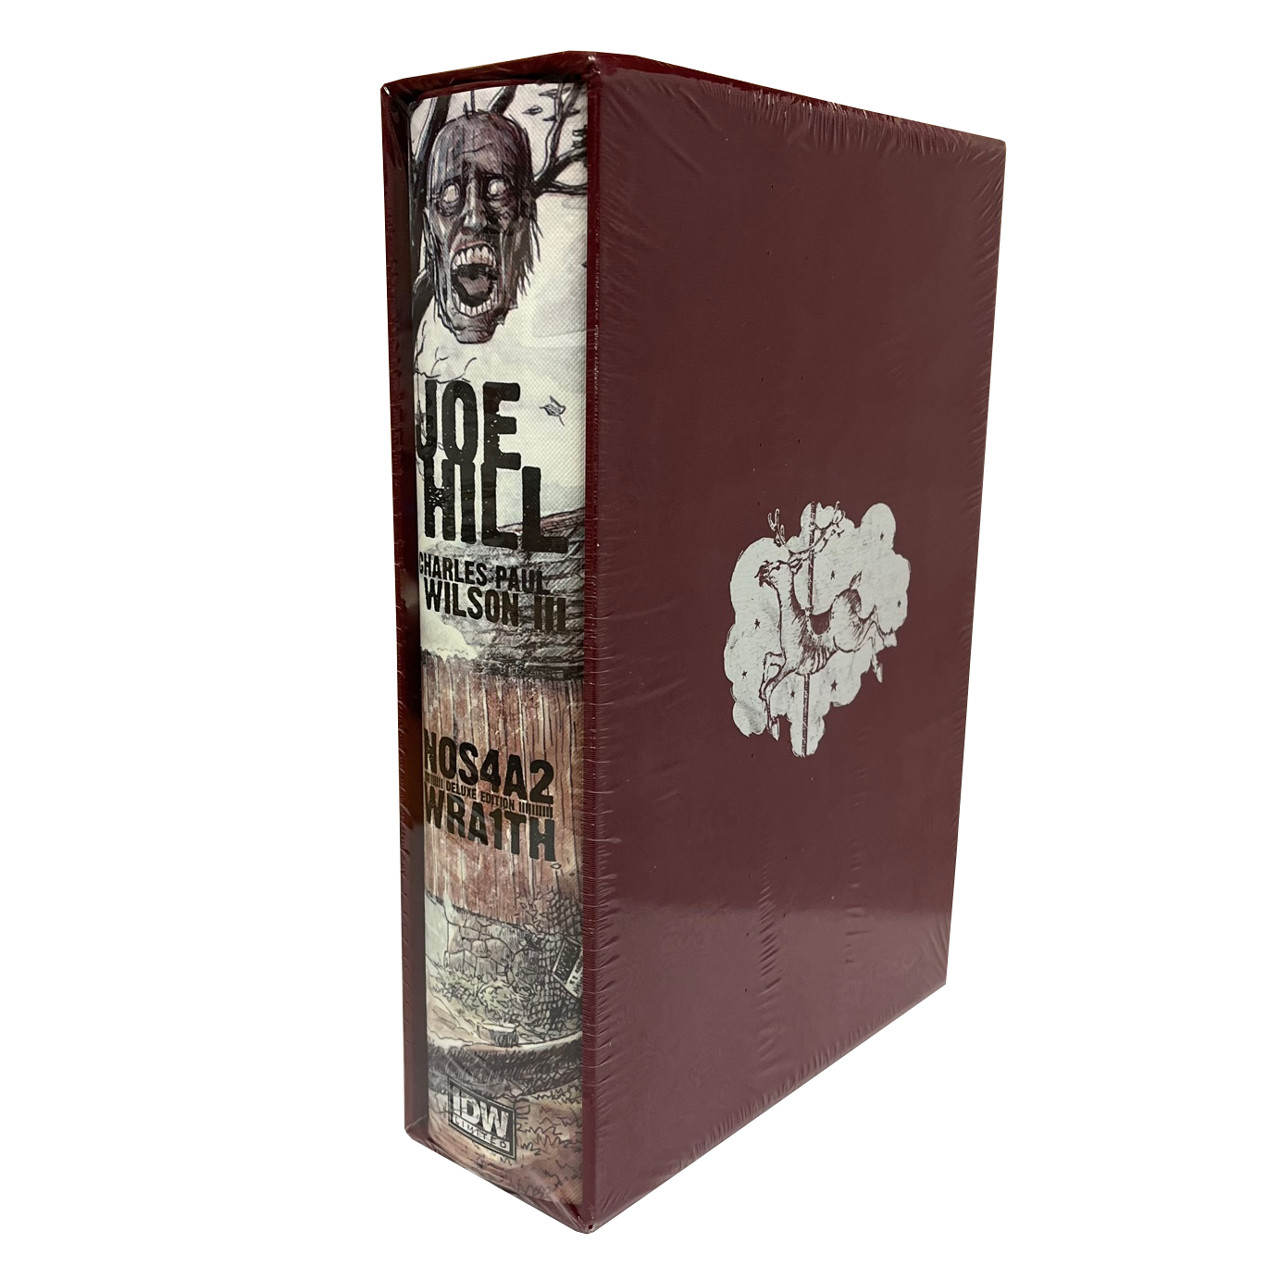 Joe Hill NOS4A2 / WRA1TH Slipcased Signed Limited Edition of 999 [Sealed]